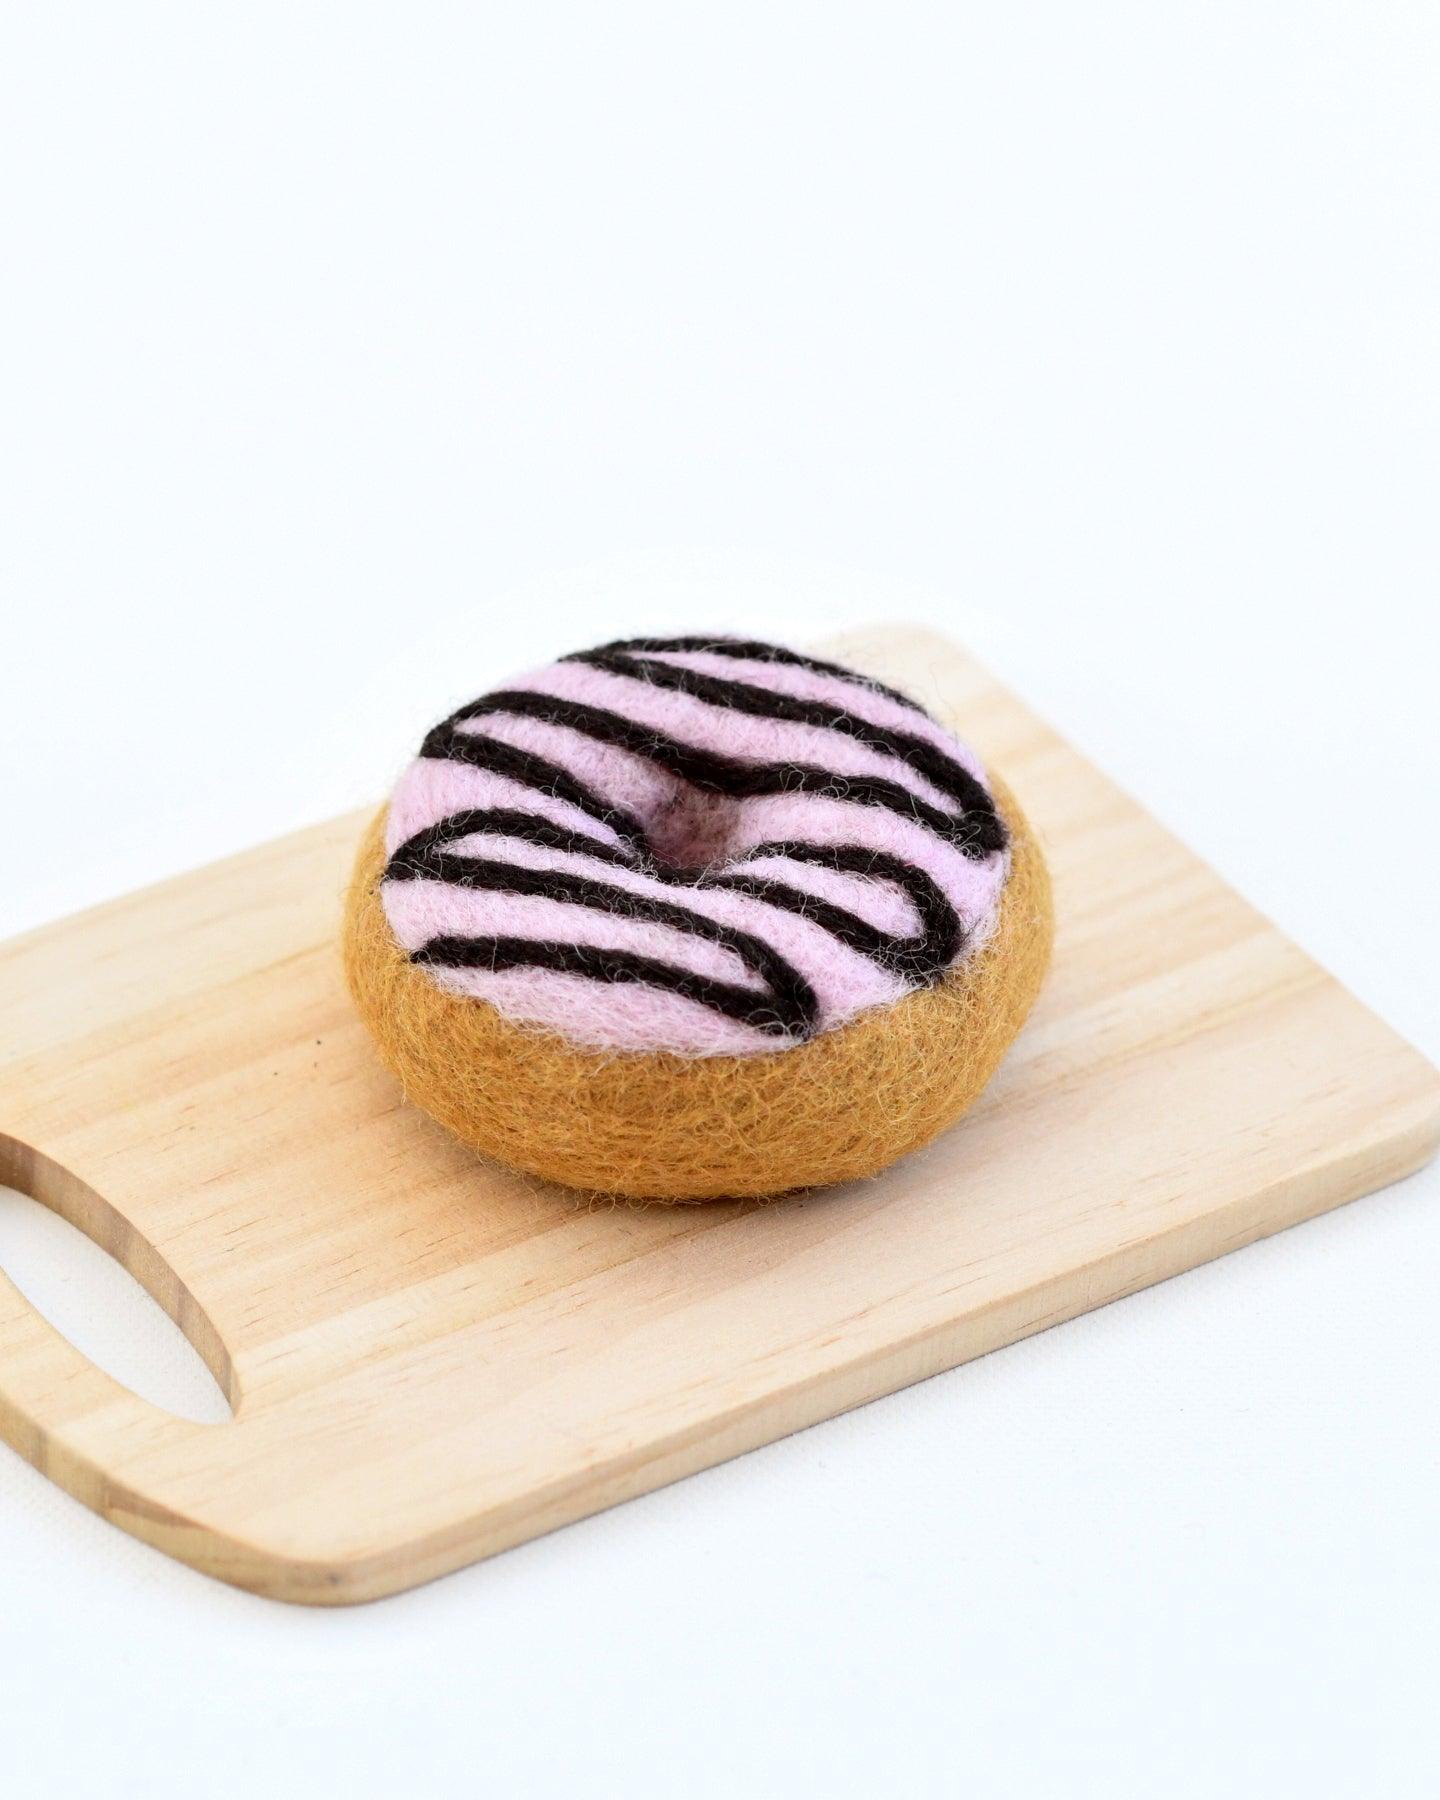 Felt Doughnut (Donut) with Pink Vanilla Frosting and Chocolate Drizzle